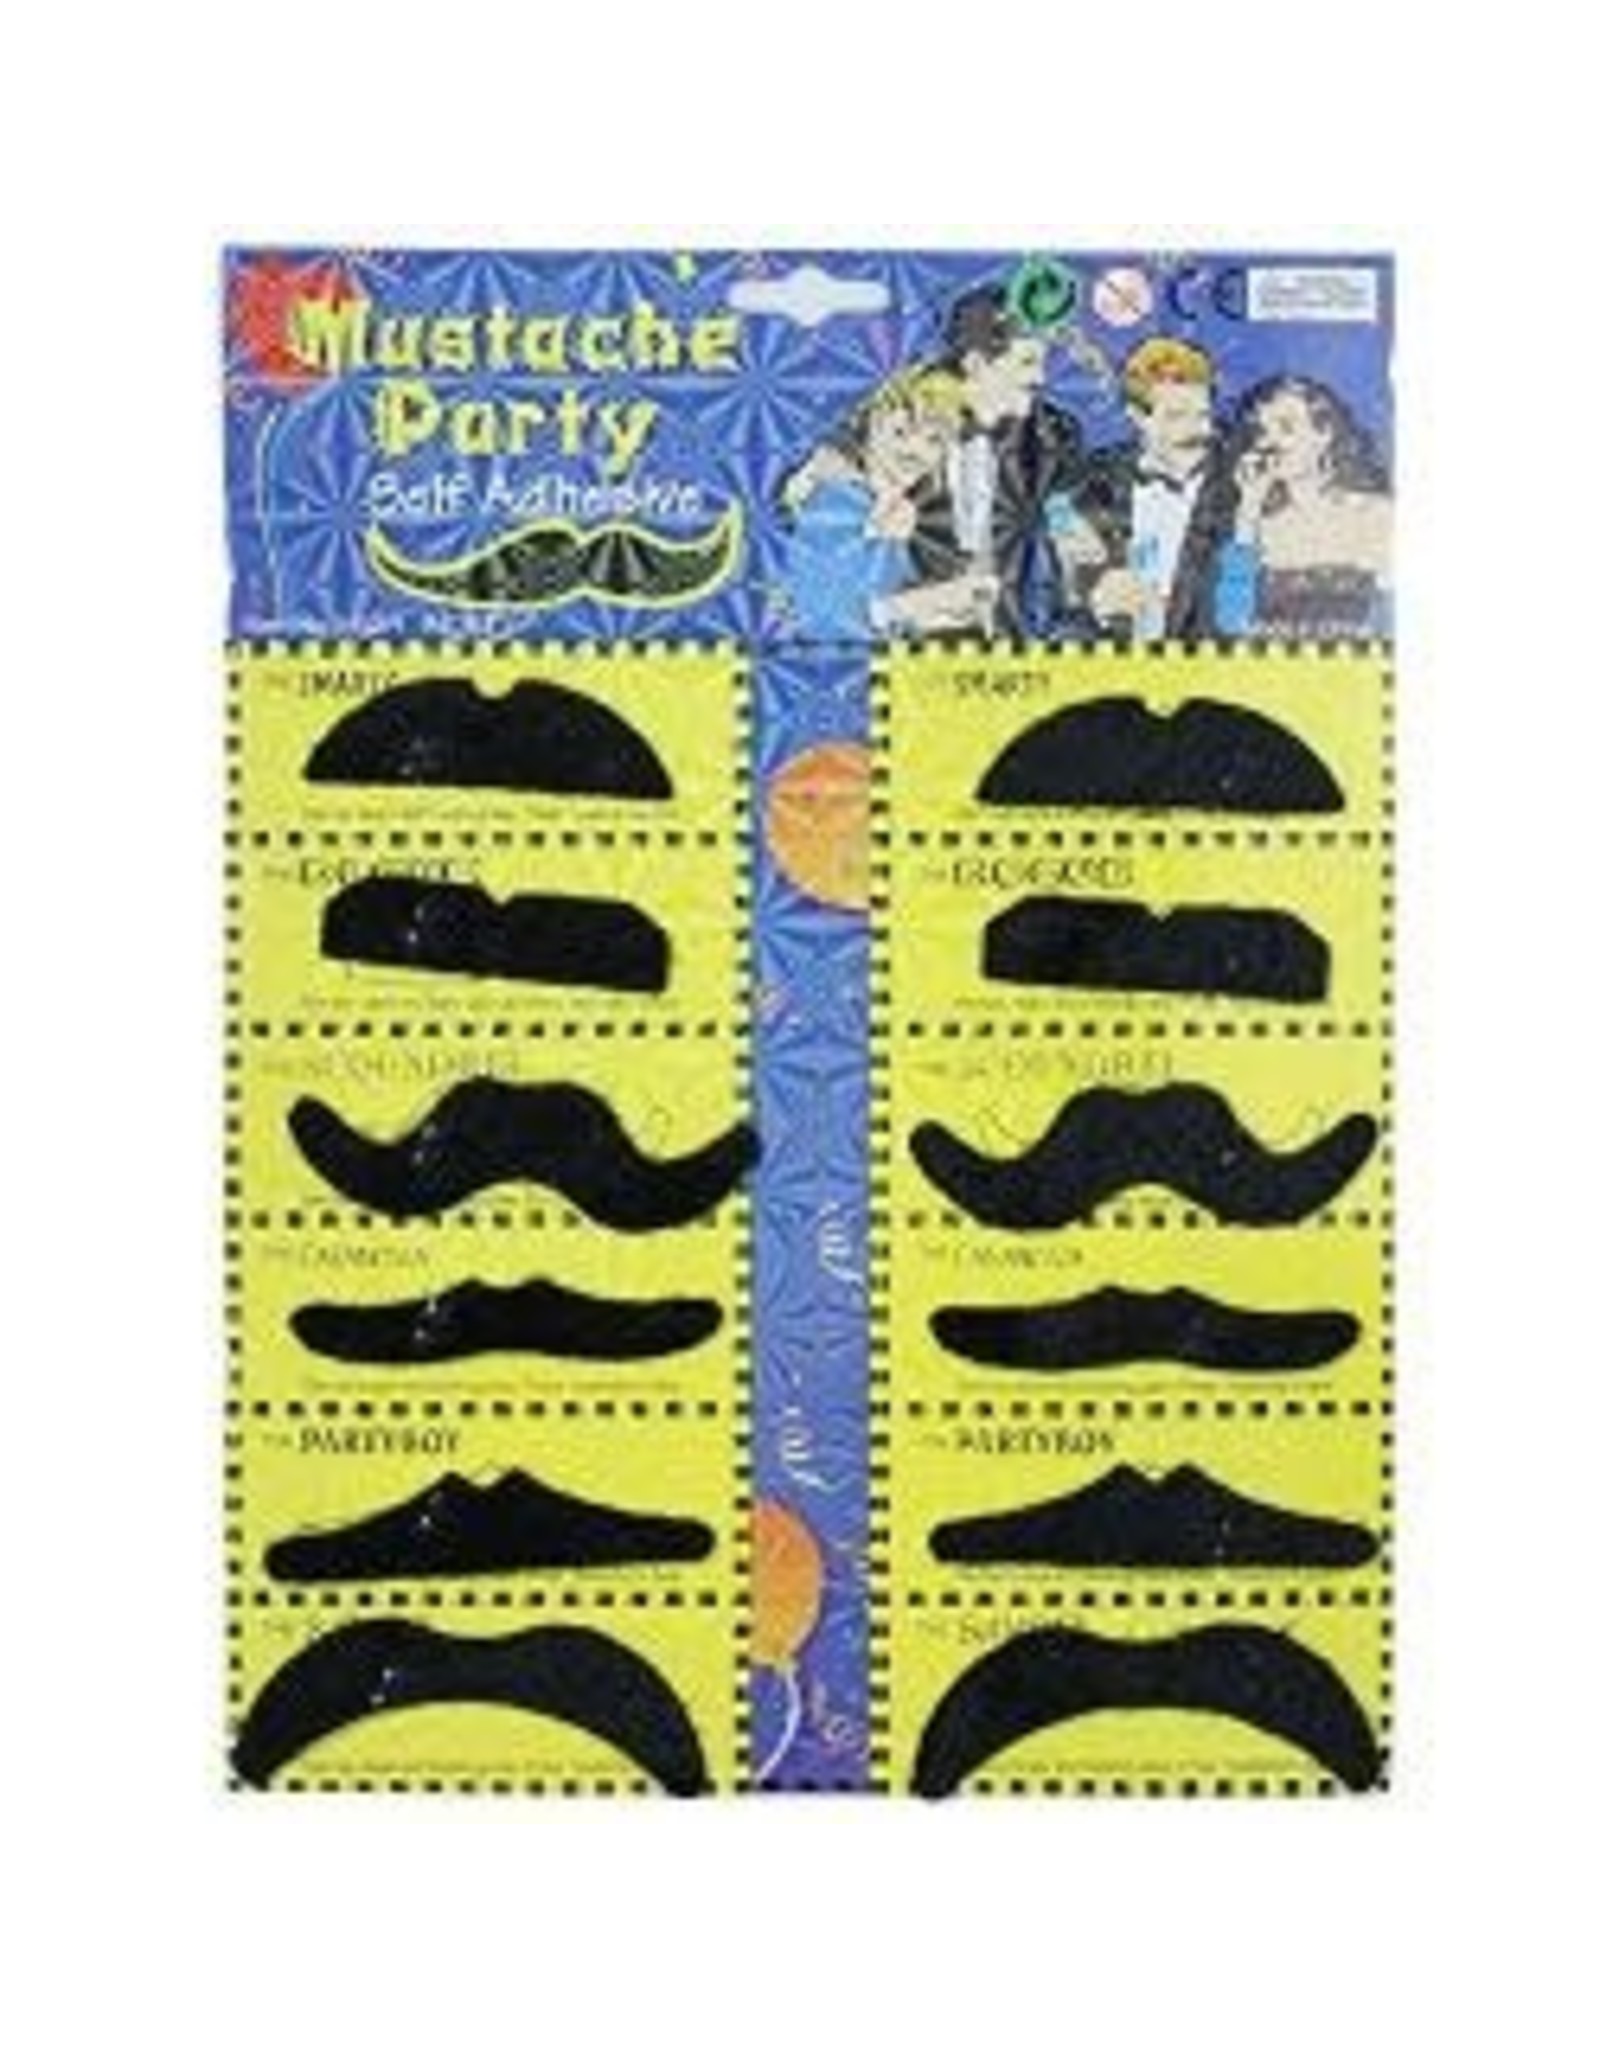 Vks Assorted Mustaches, Multi, Adult